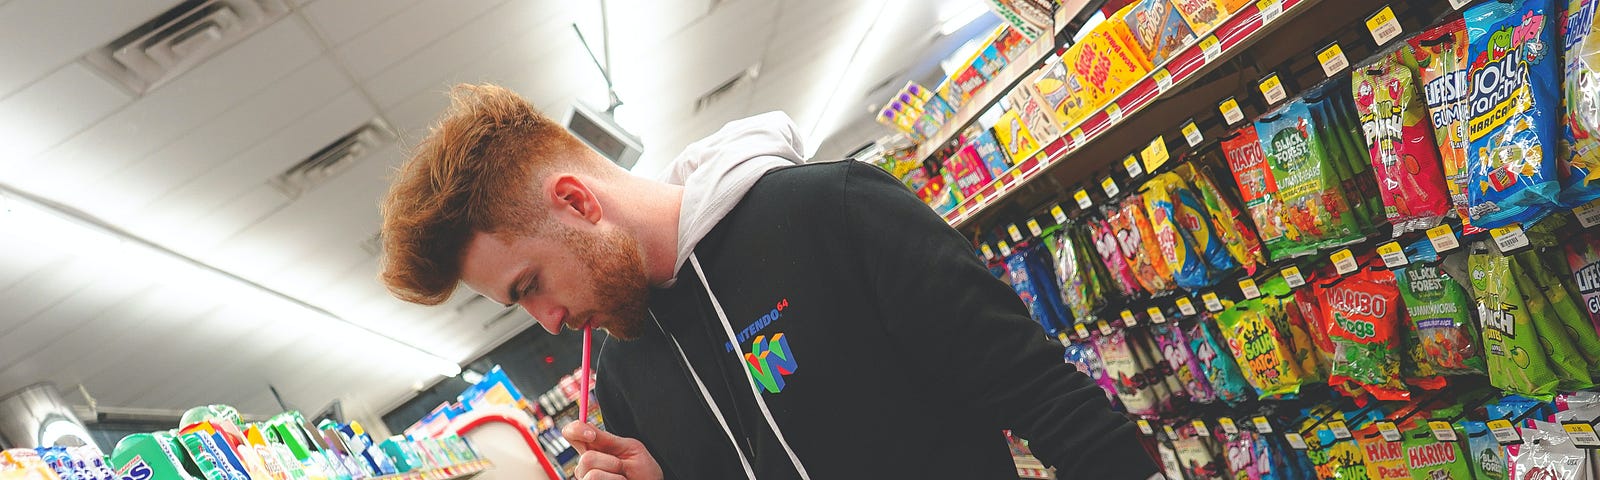 A picture taken on a slant so it feels a bit dizzying. a young man standing in a store between two aisles crammed with packed candies, drinks, etc. He looks like there are way too many choices